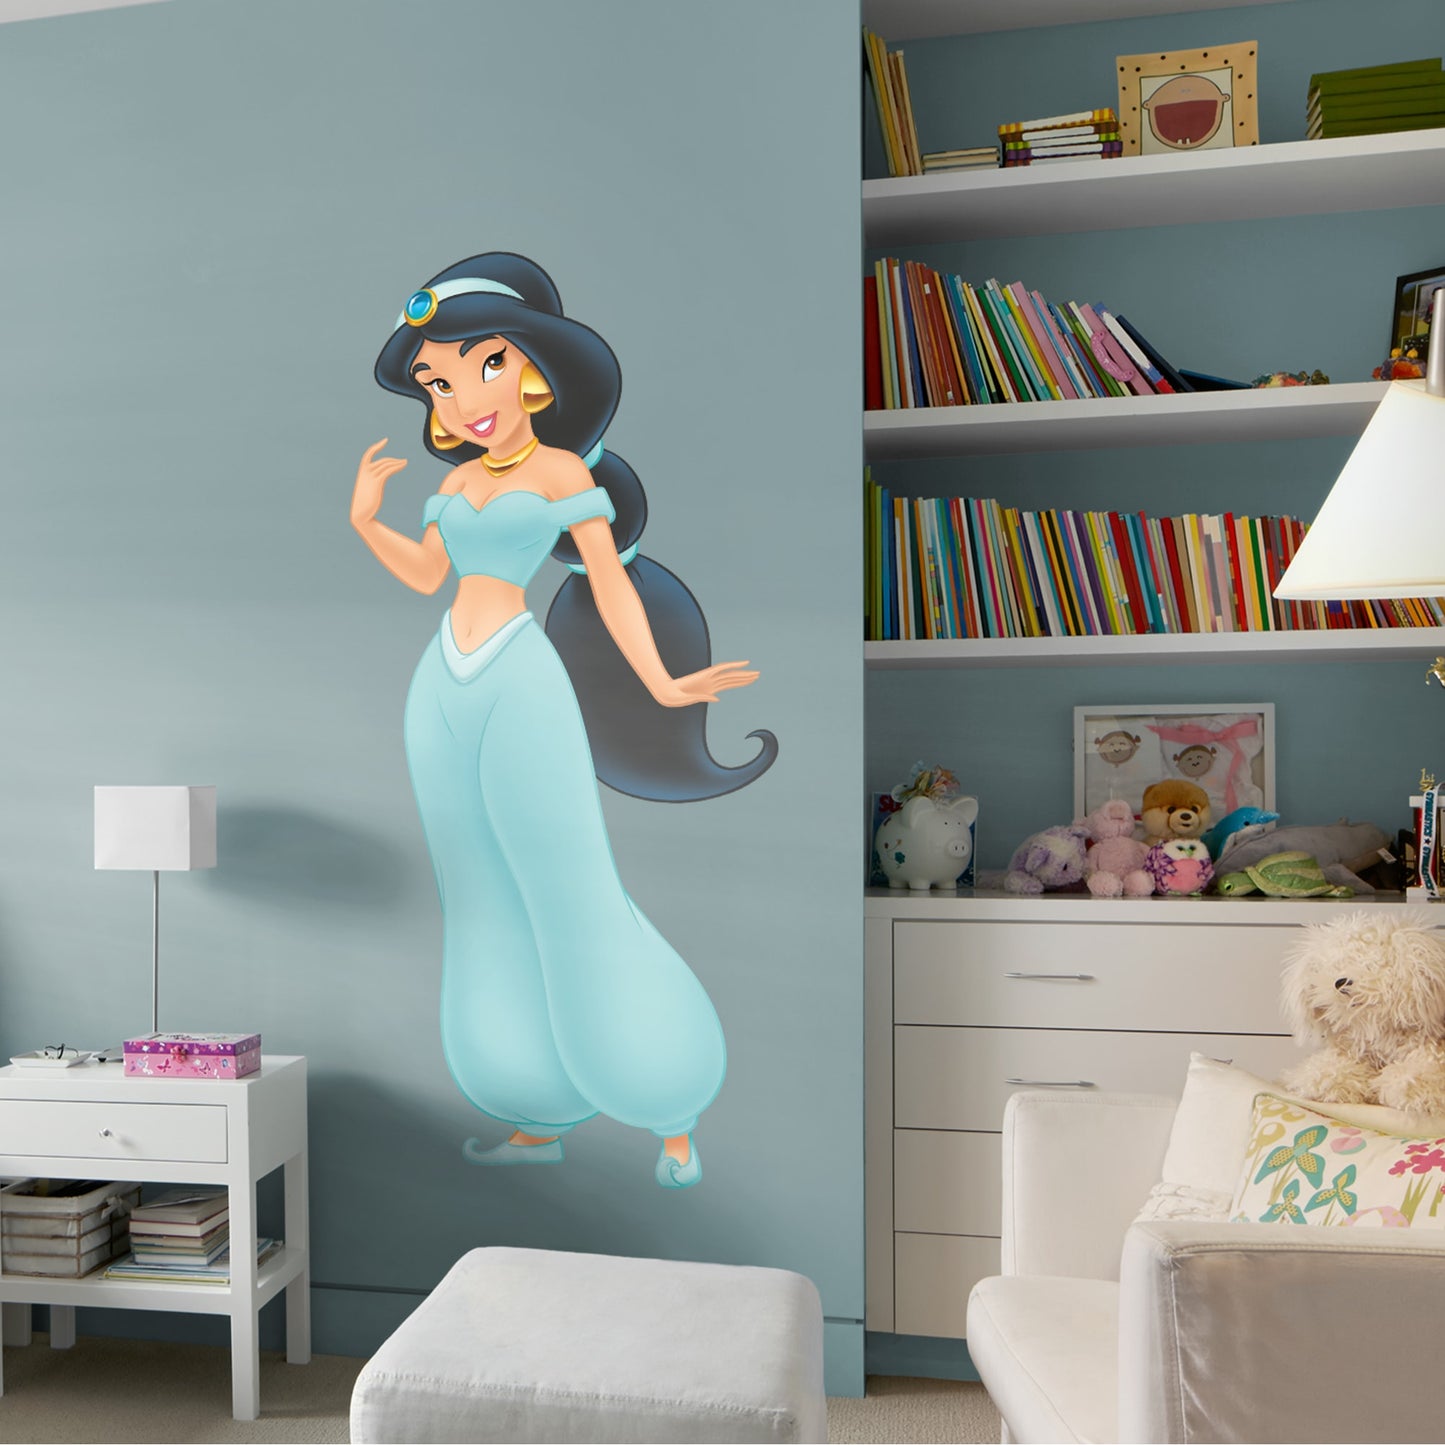 Jasmine - Officially Licensed Disney Removable Wall Decal